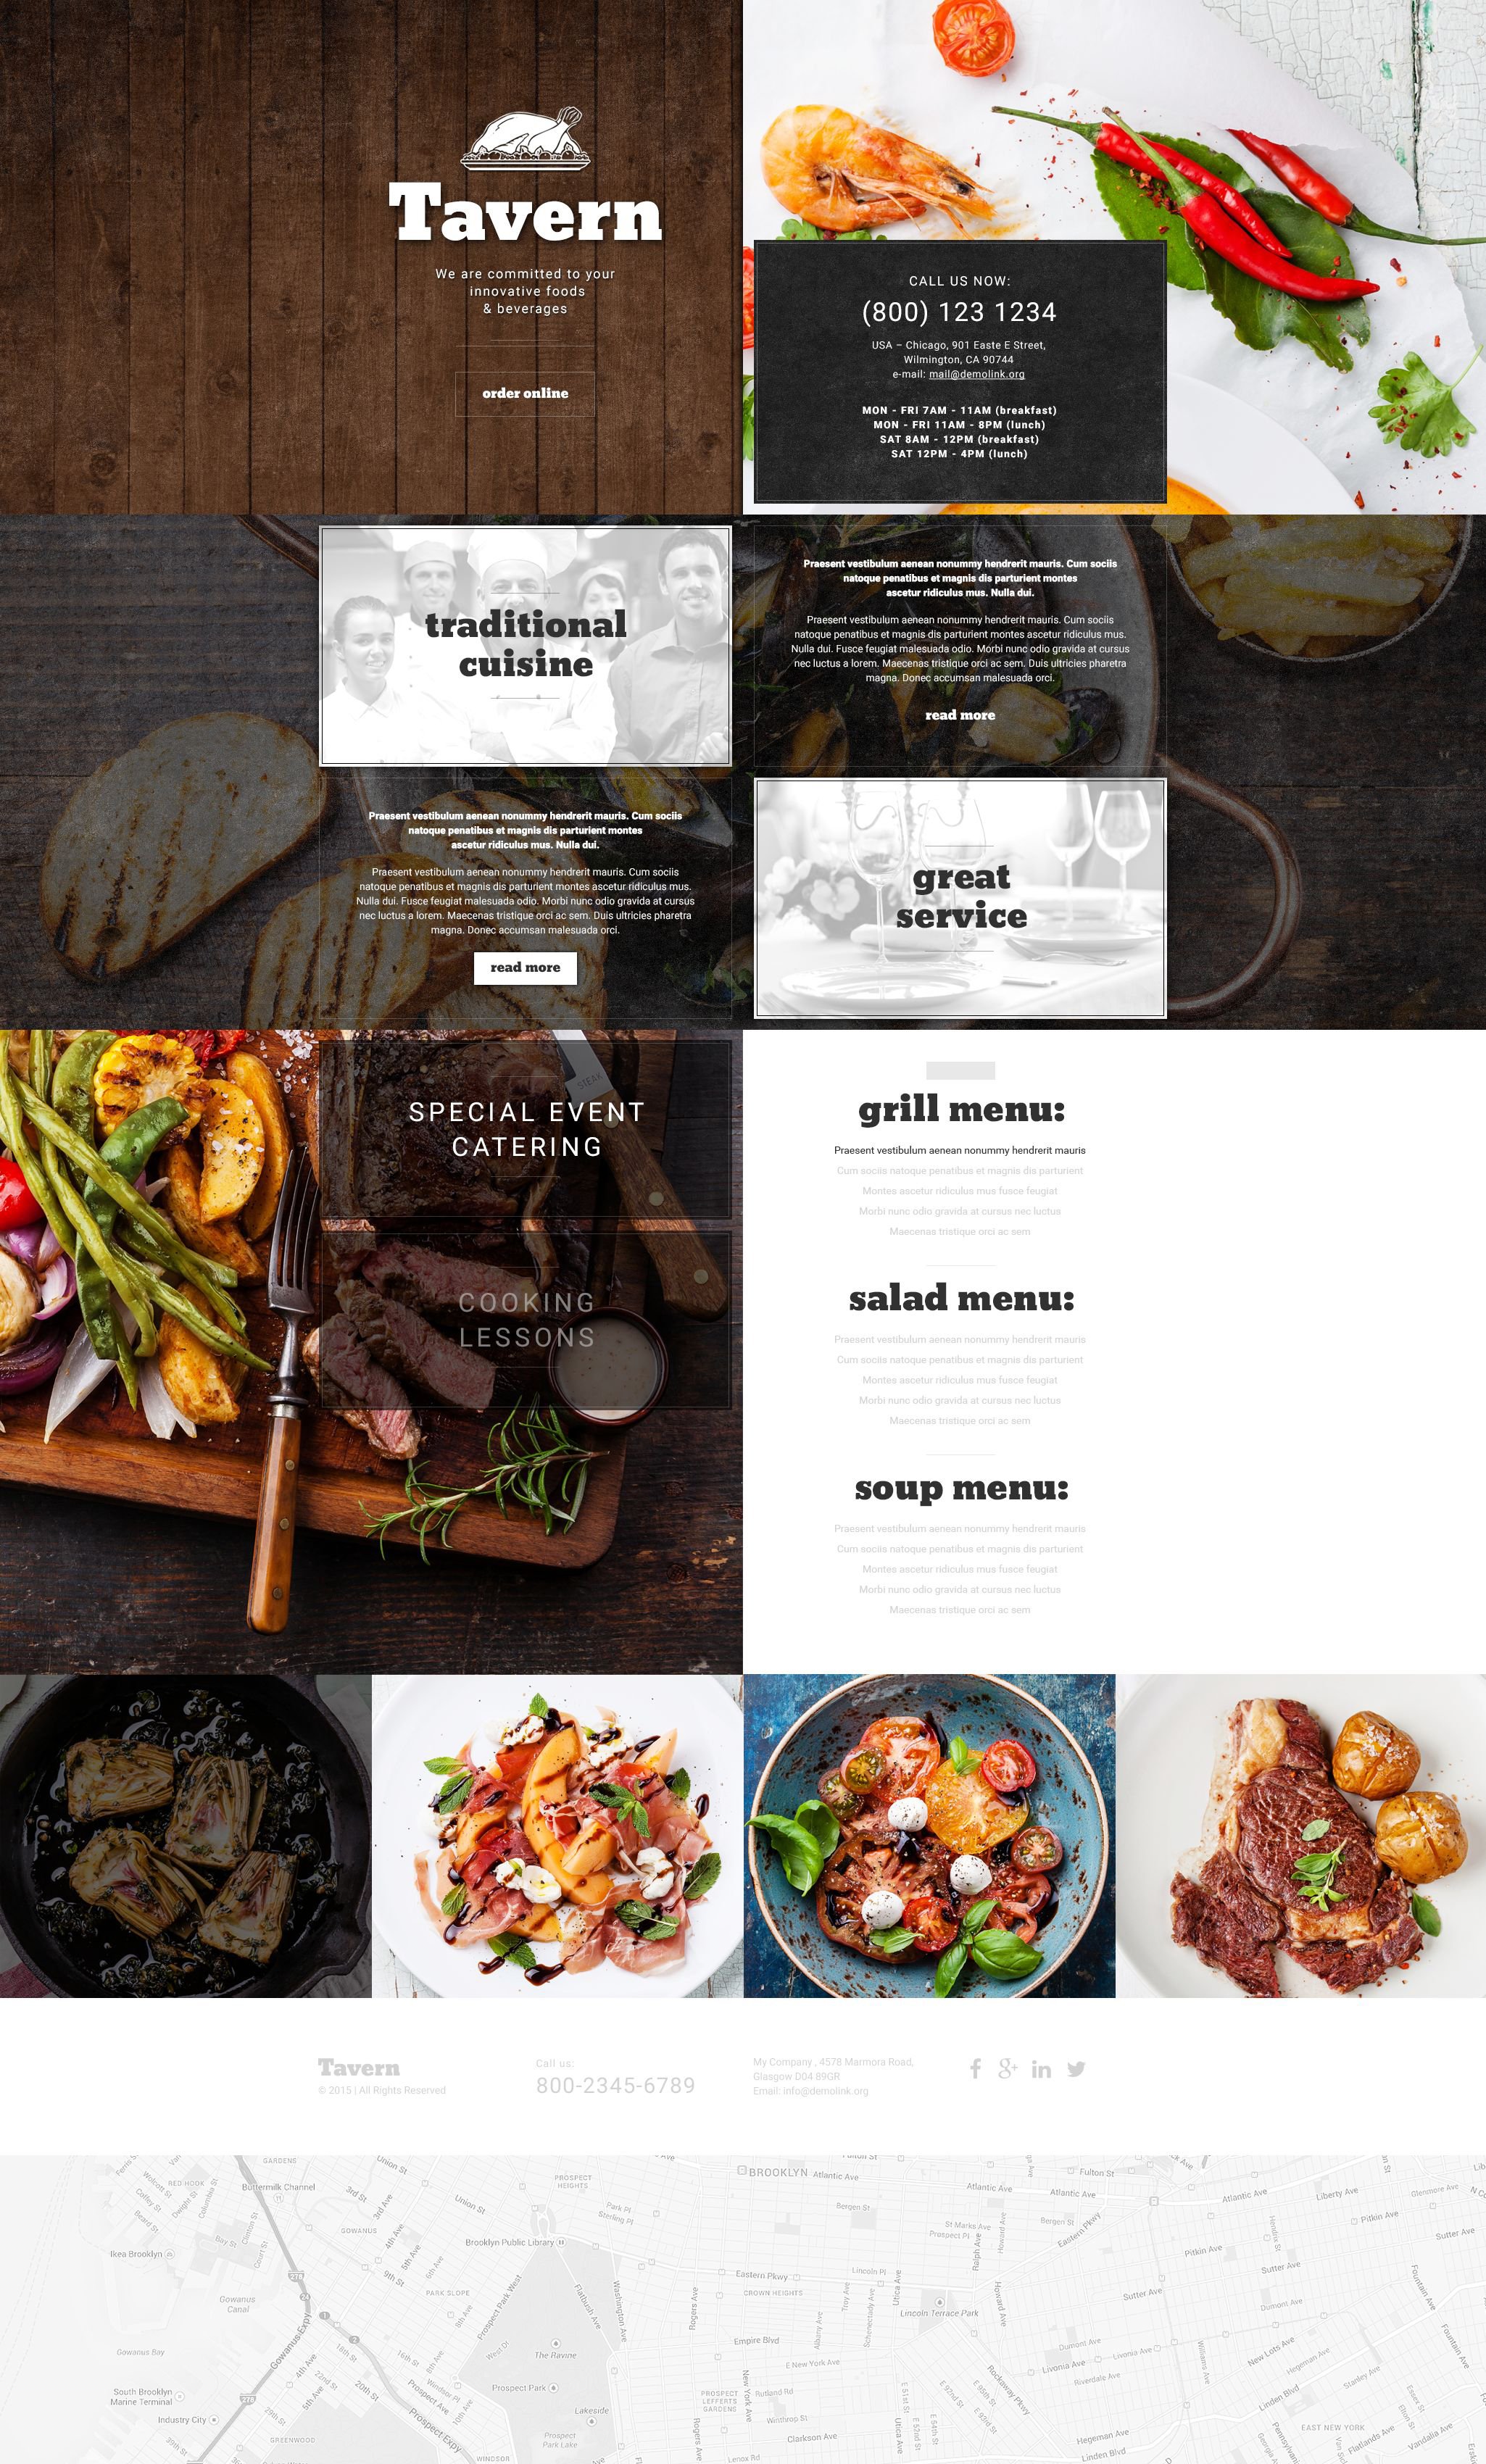 Cafe and Restaurant Responsive Landing Page Template